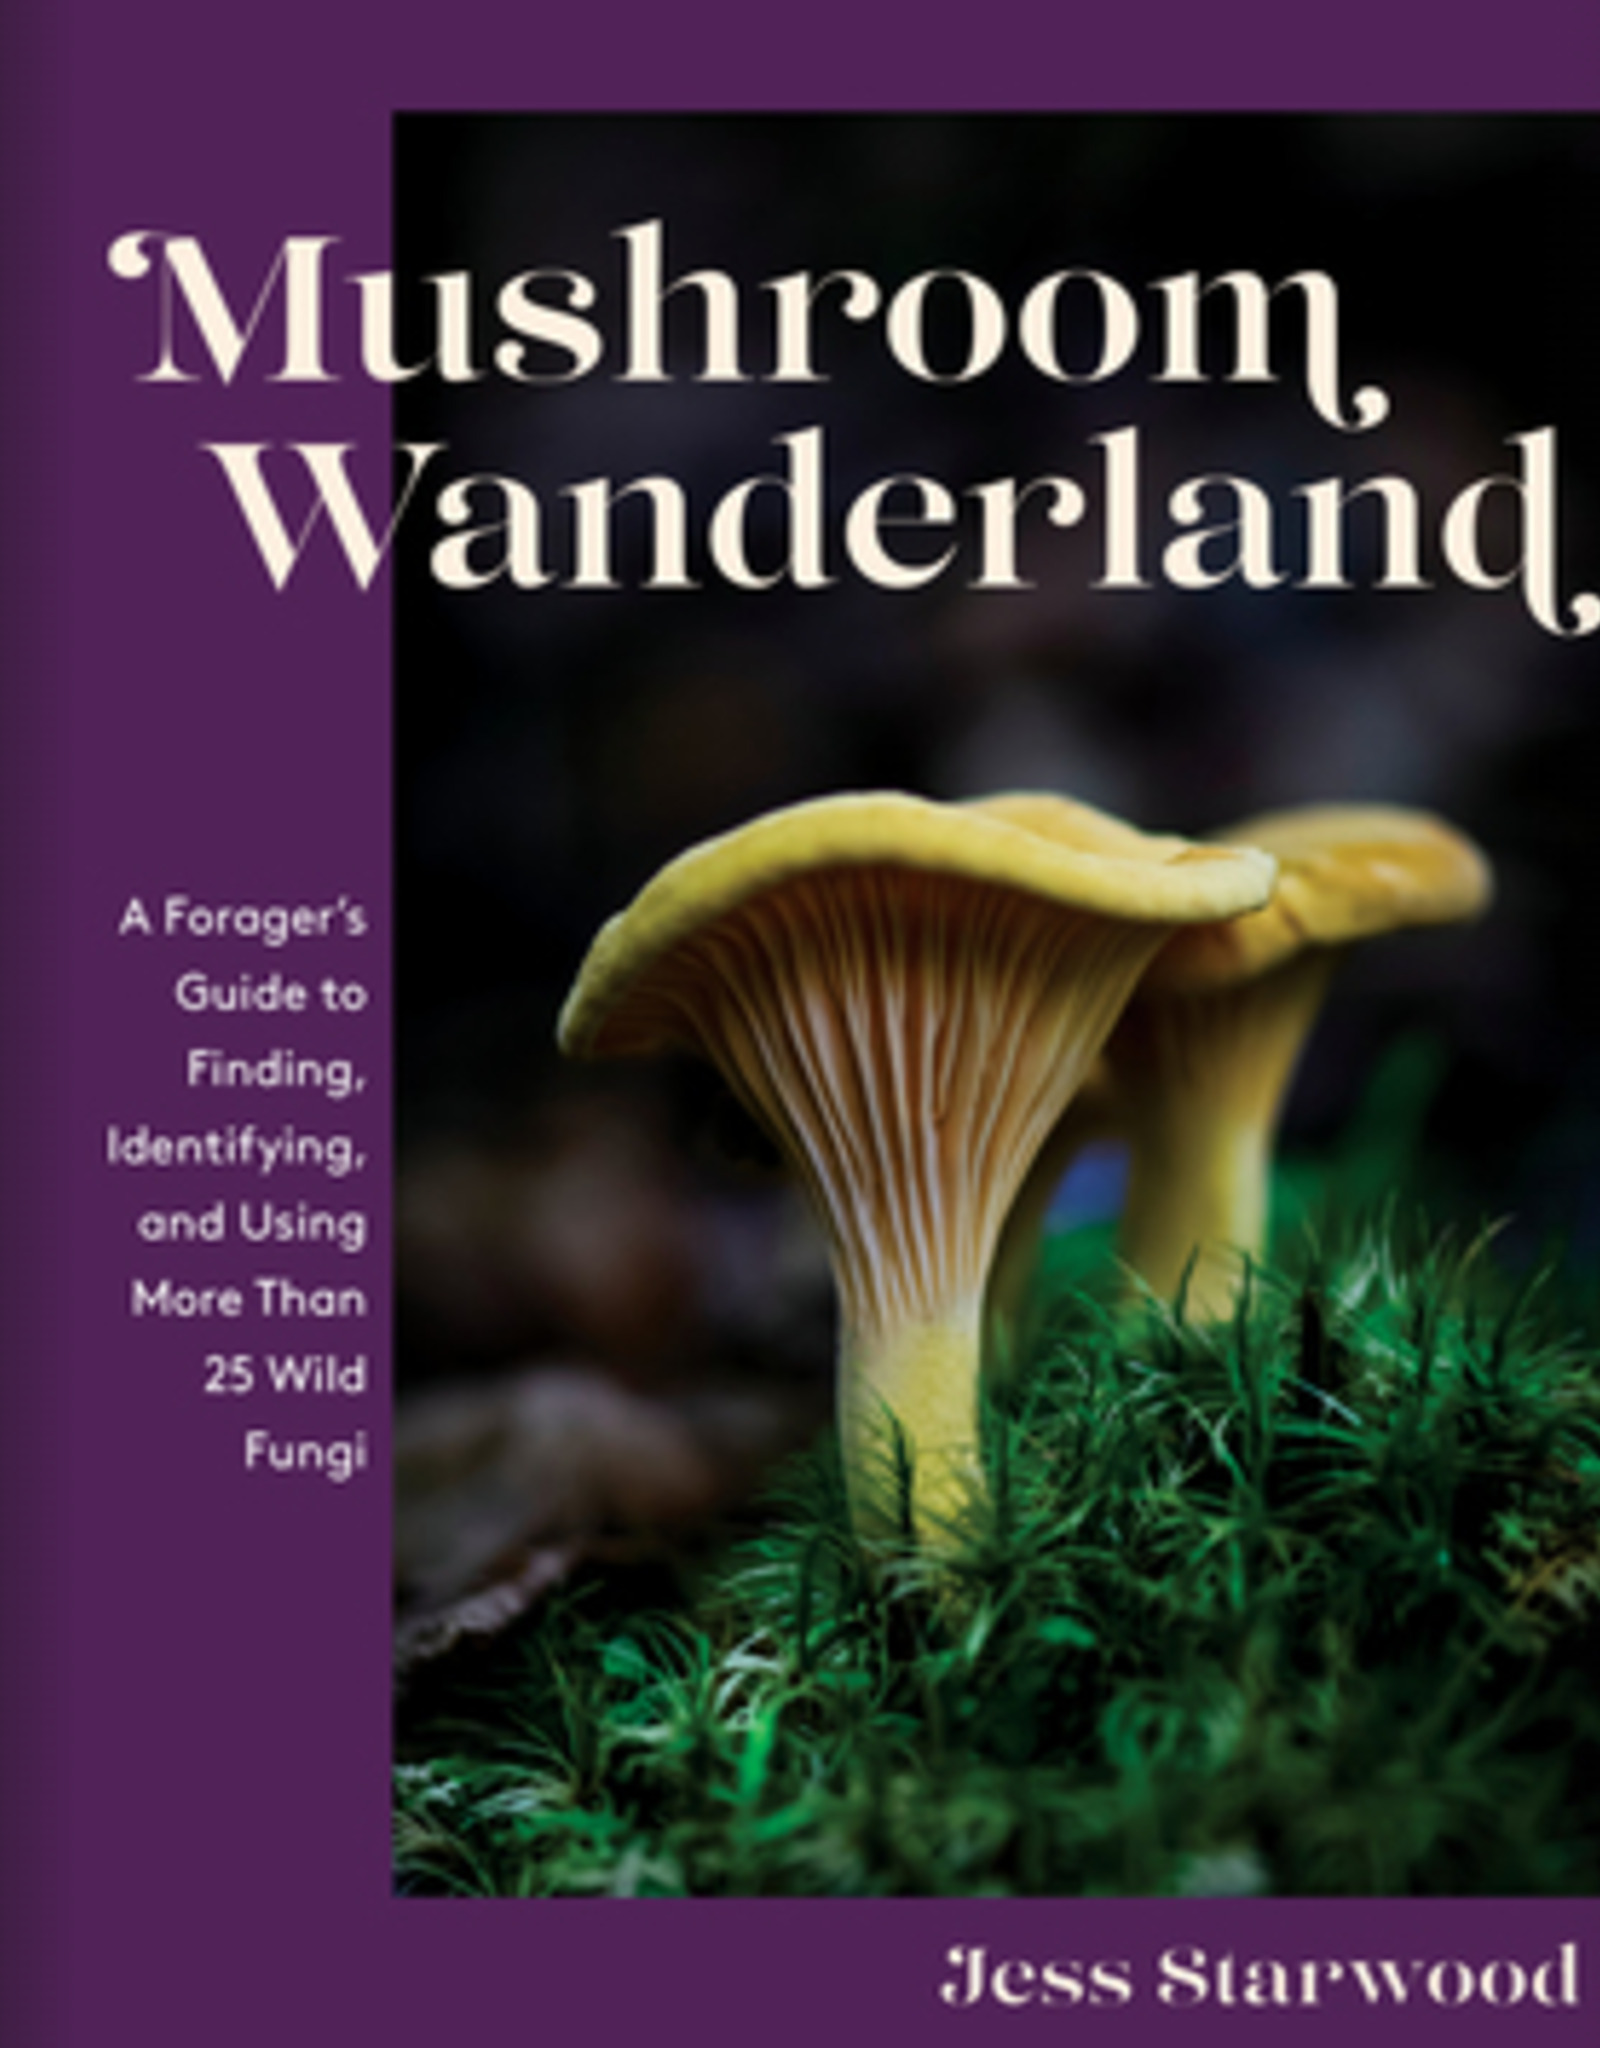 Mushroom Wanderland: A Forager's Guide to Finding, Identifying, and Using  More Than 25 Wild Fungi